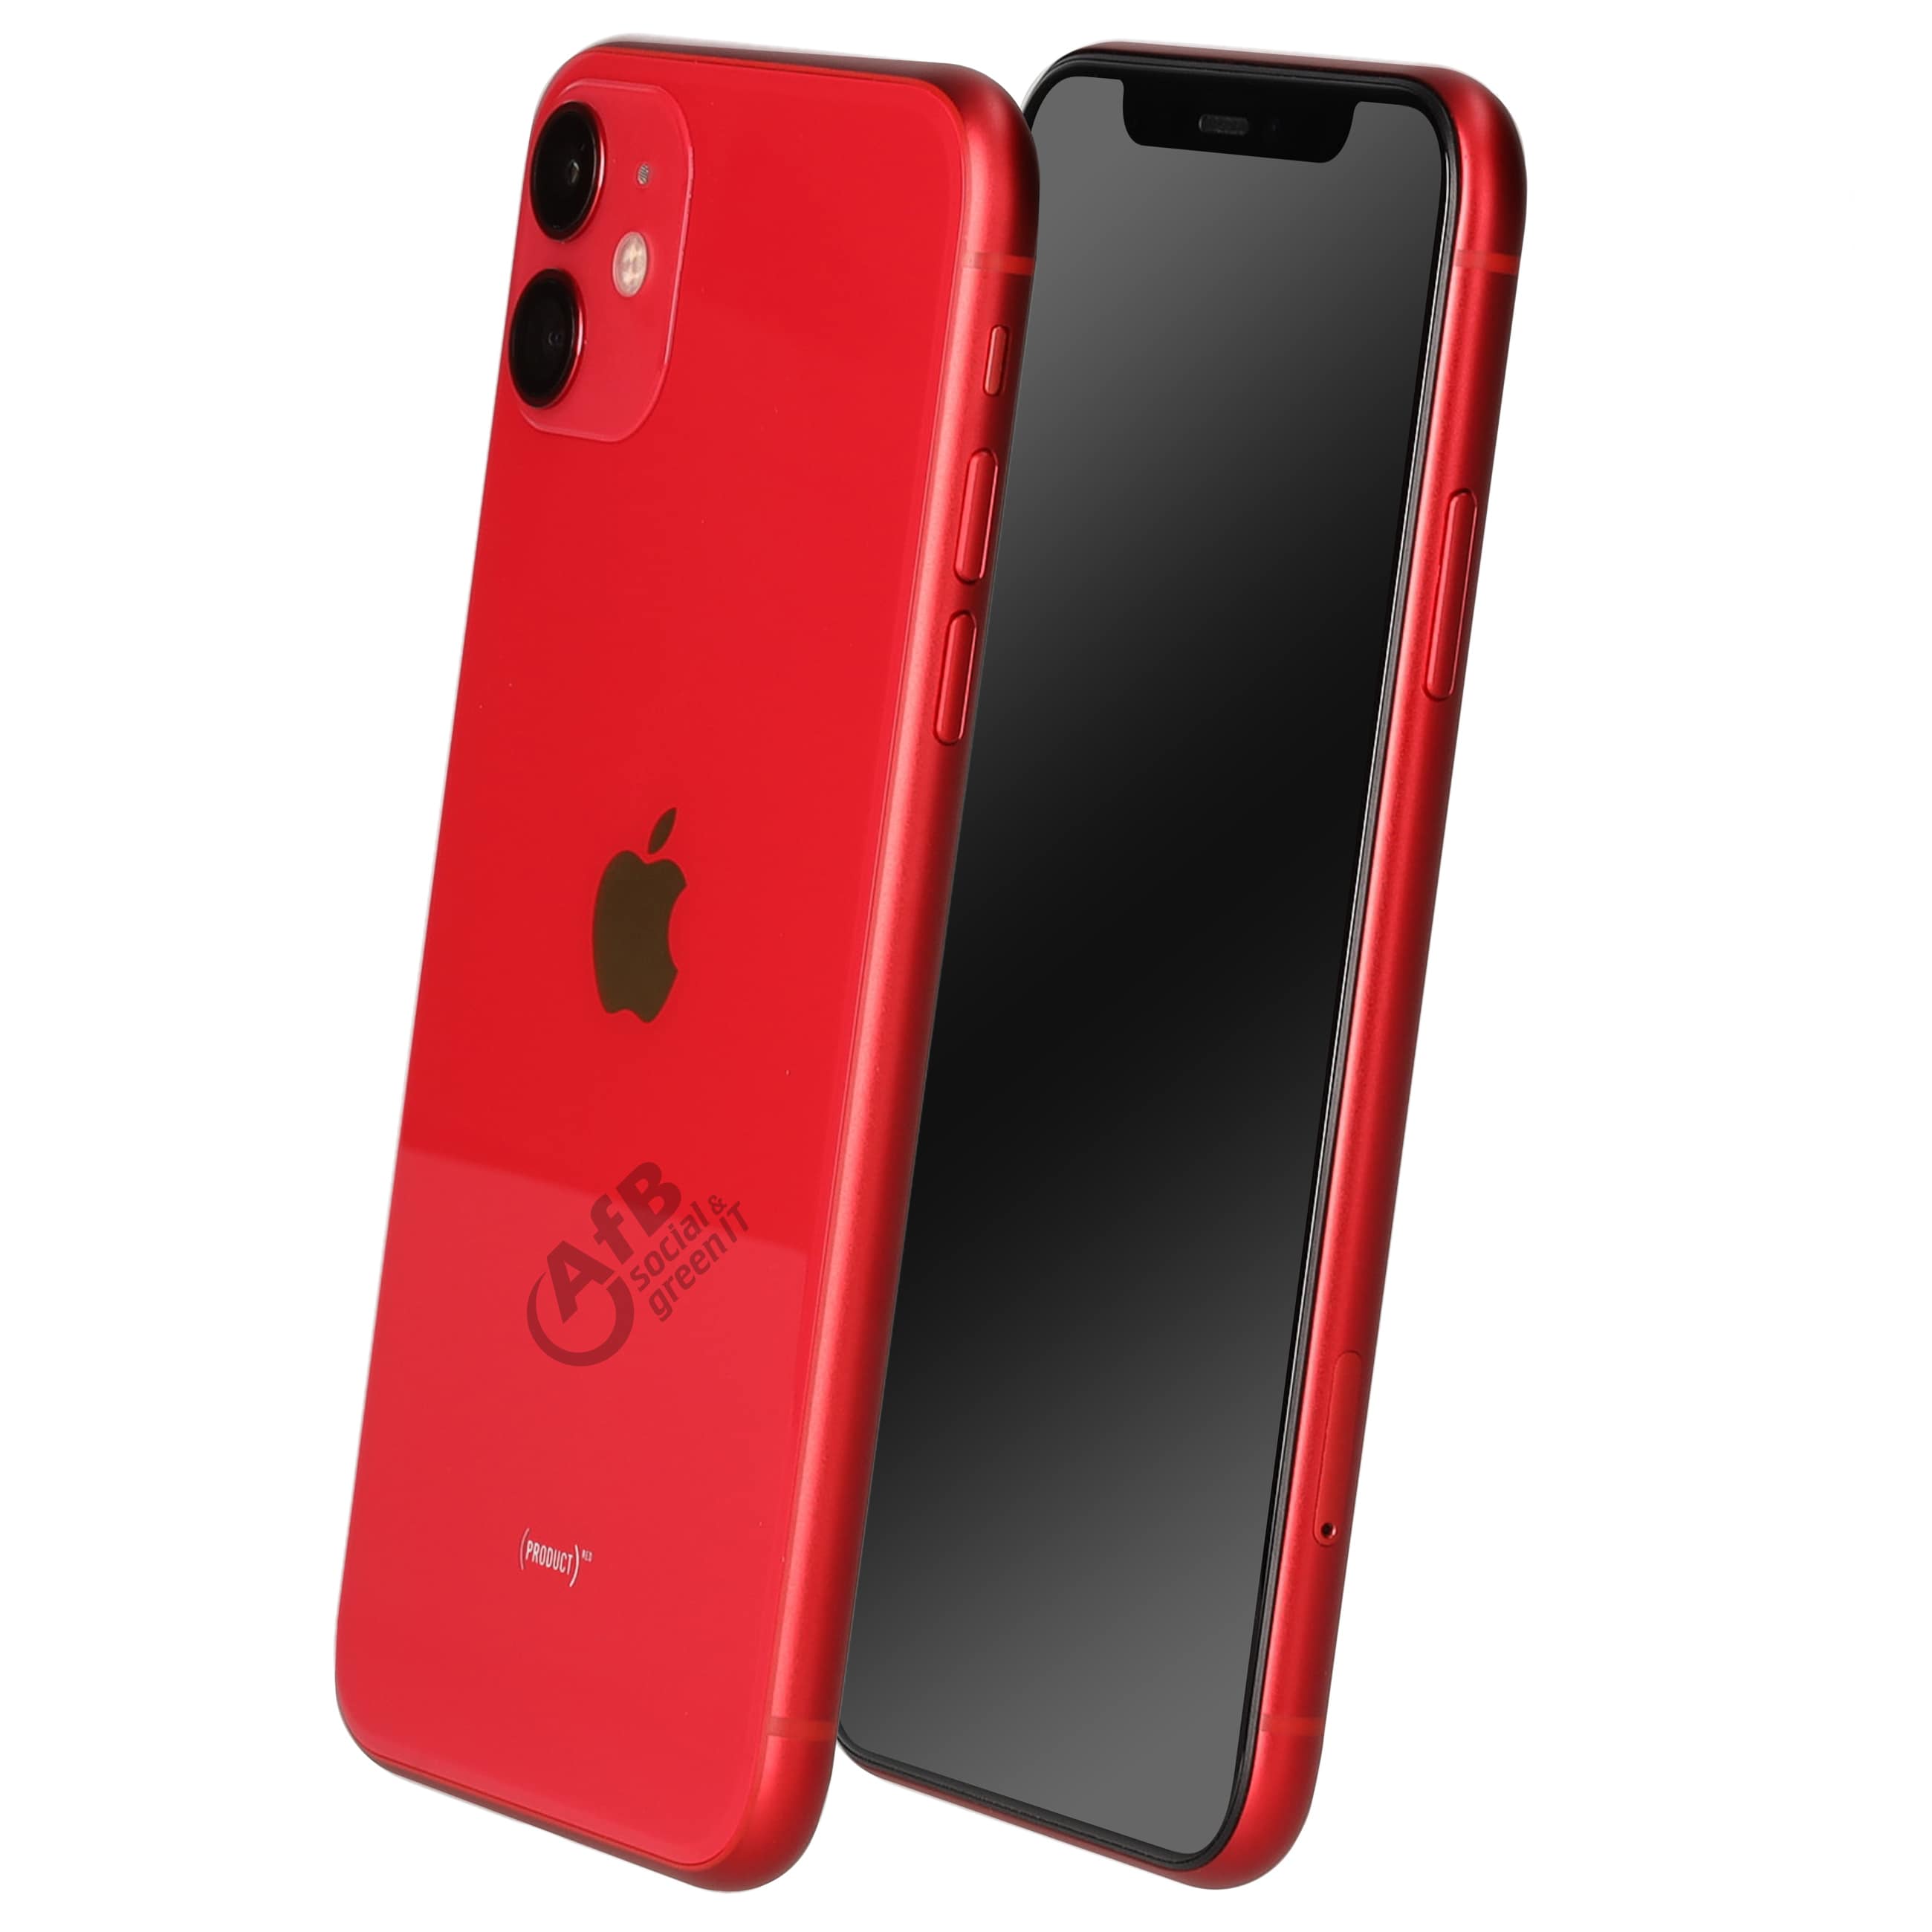 Apple iPhone 11 - 64 GB - (PRODUCT)RED